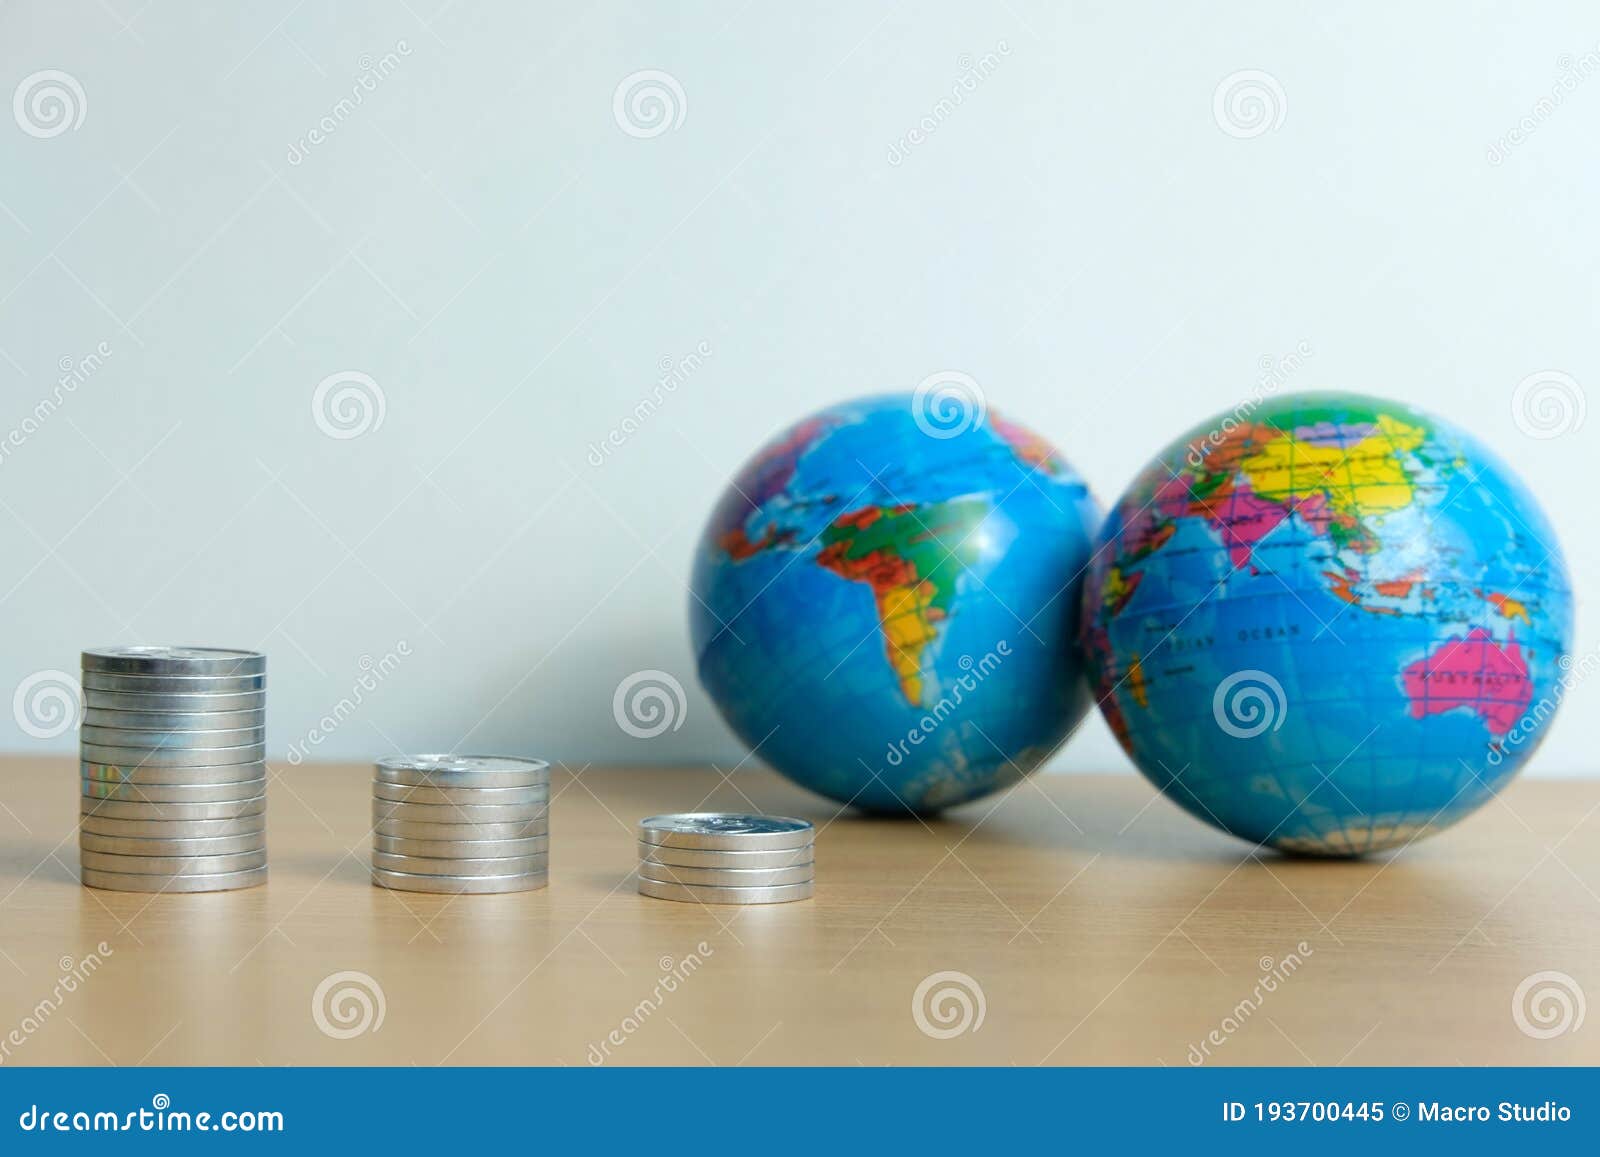 Global Trade And Financial Concept - Decreasing Stack Of ...